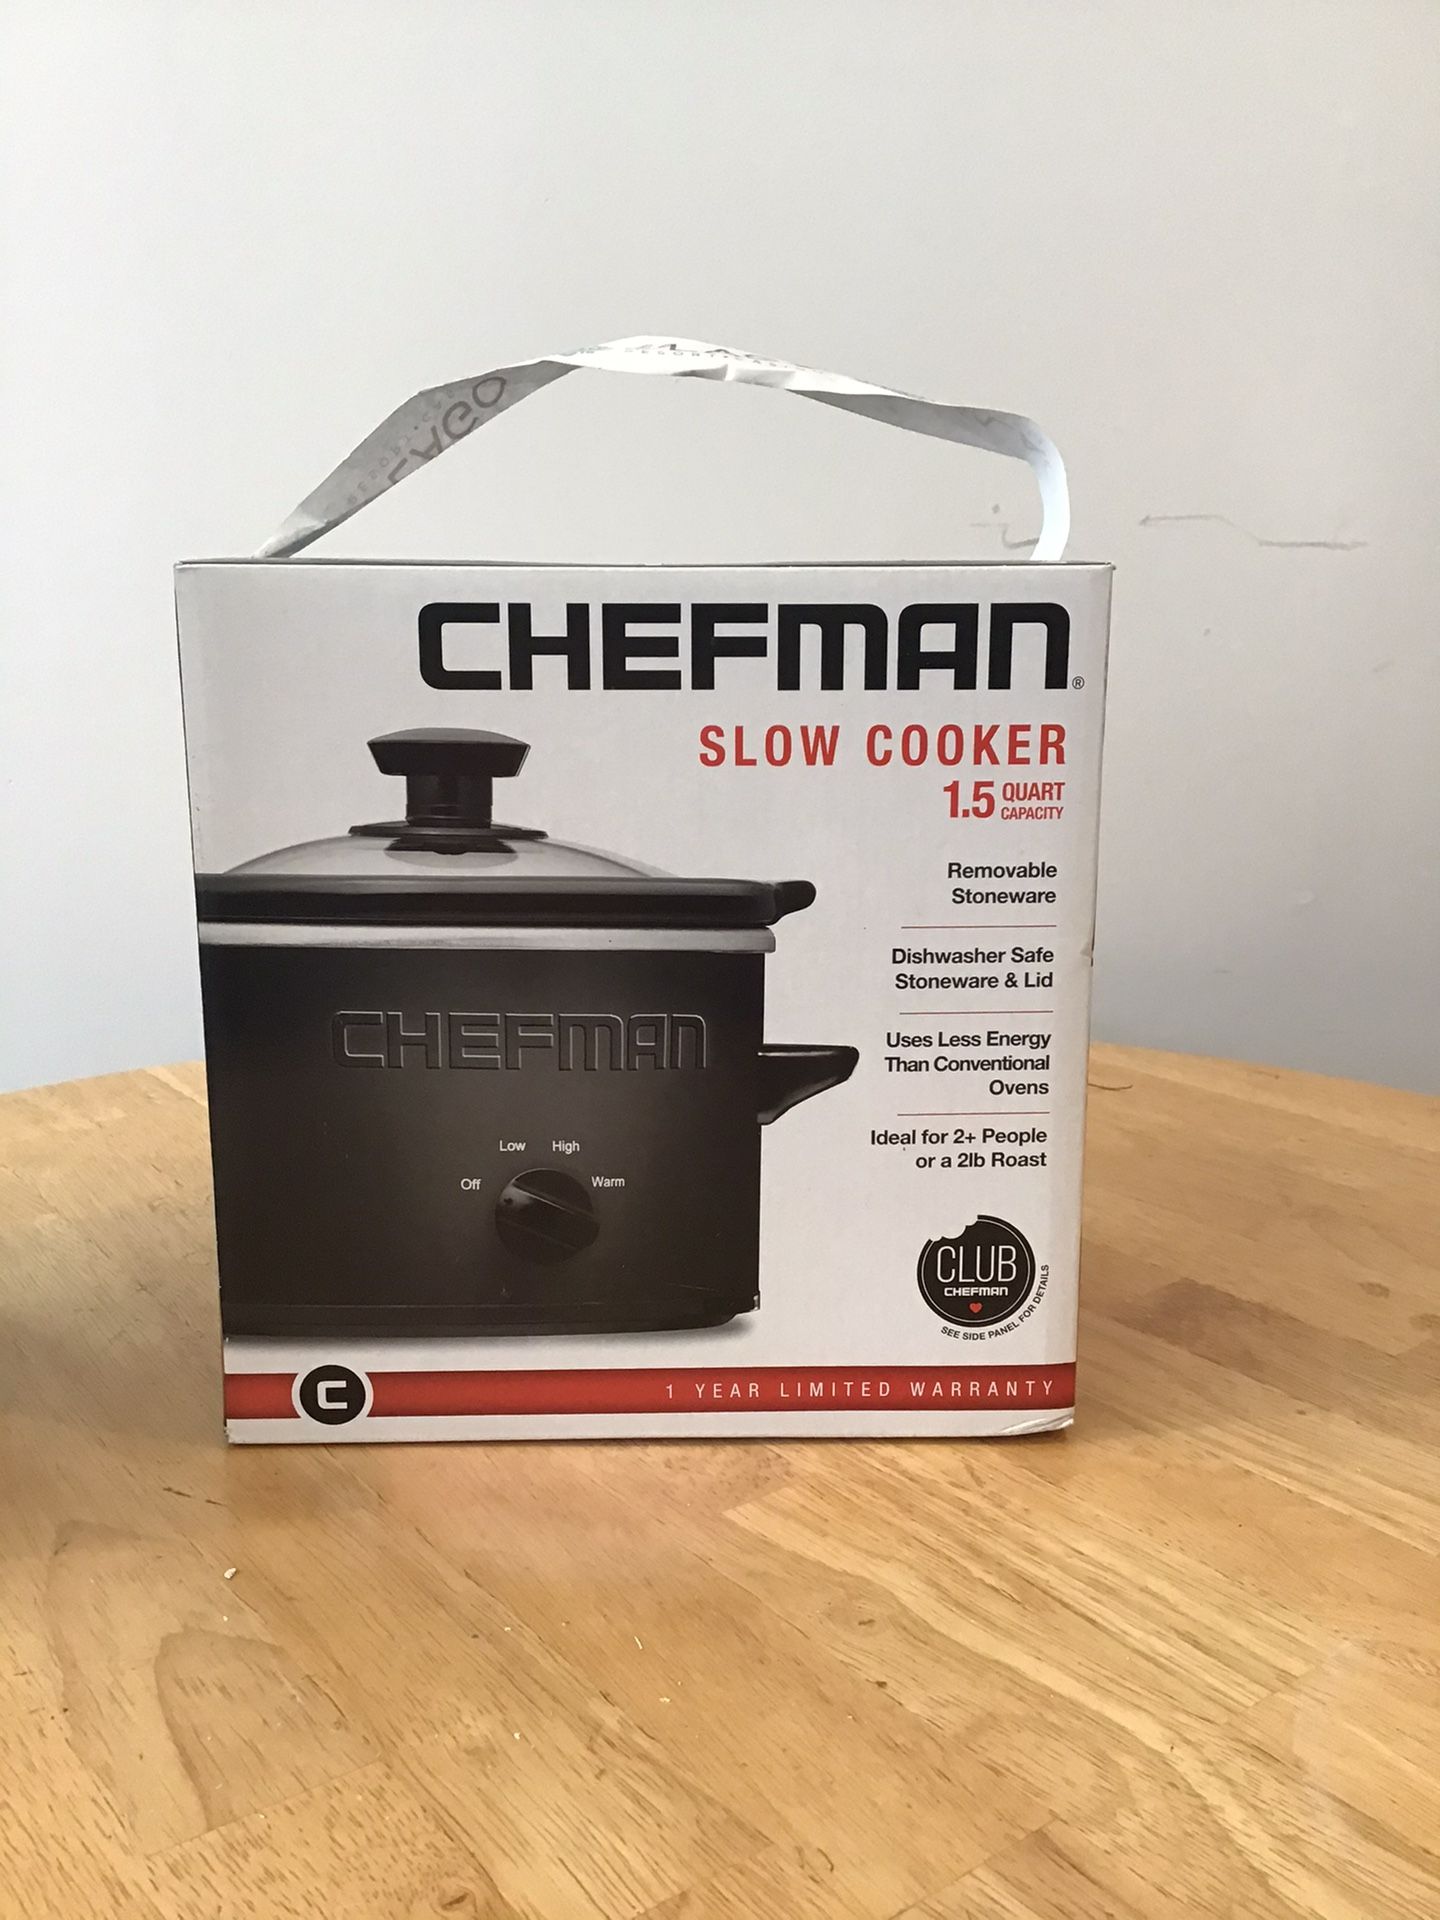 Brand New Slow Cooker - never used